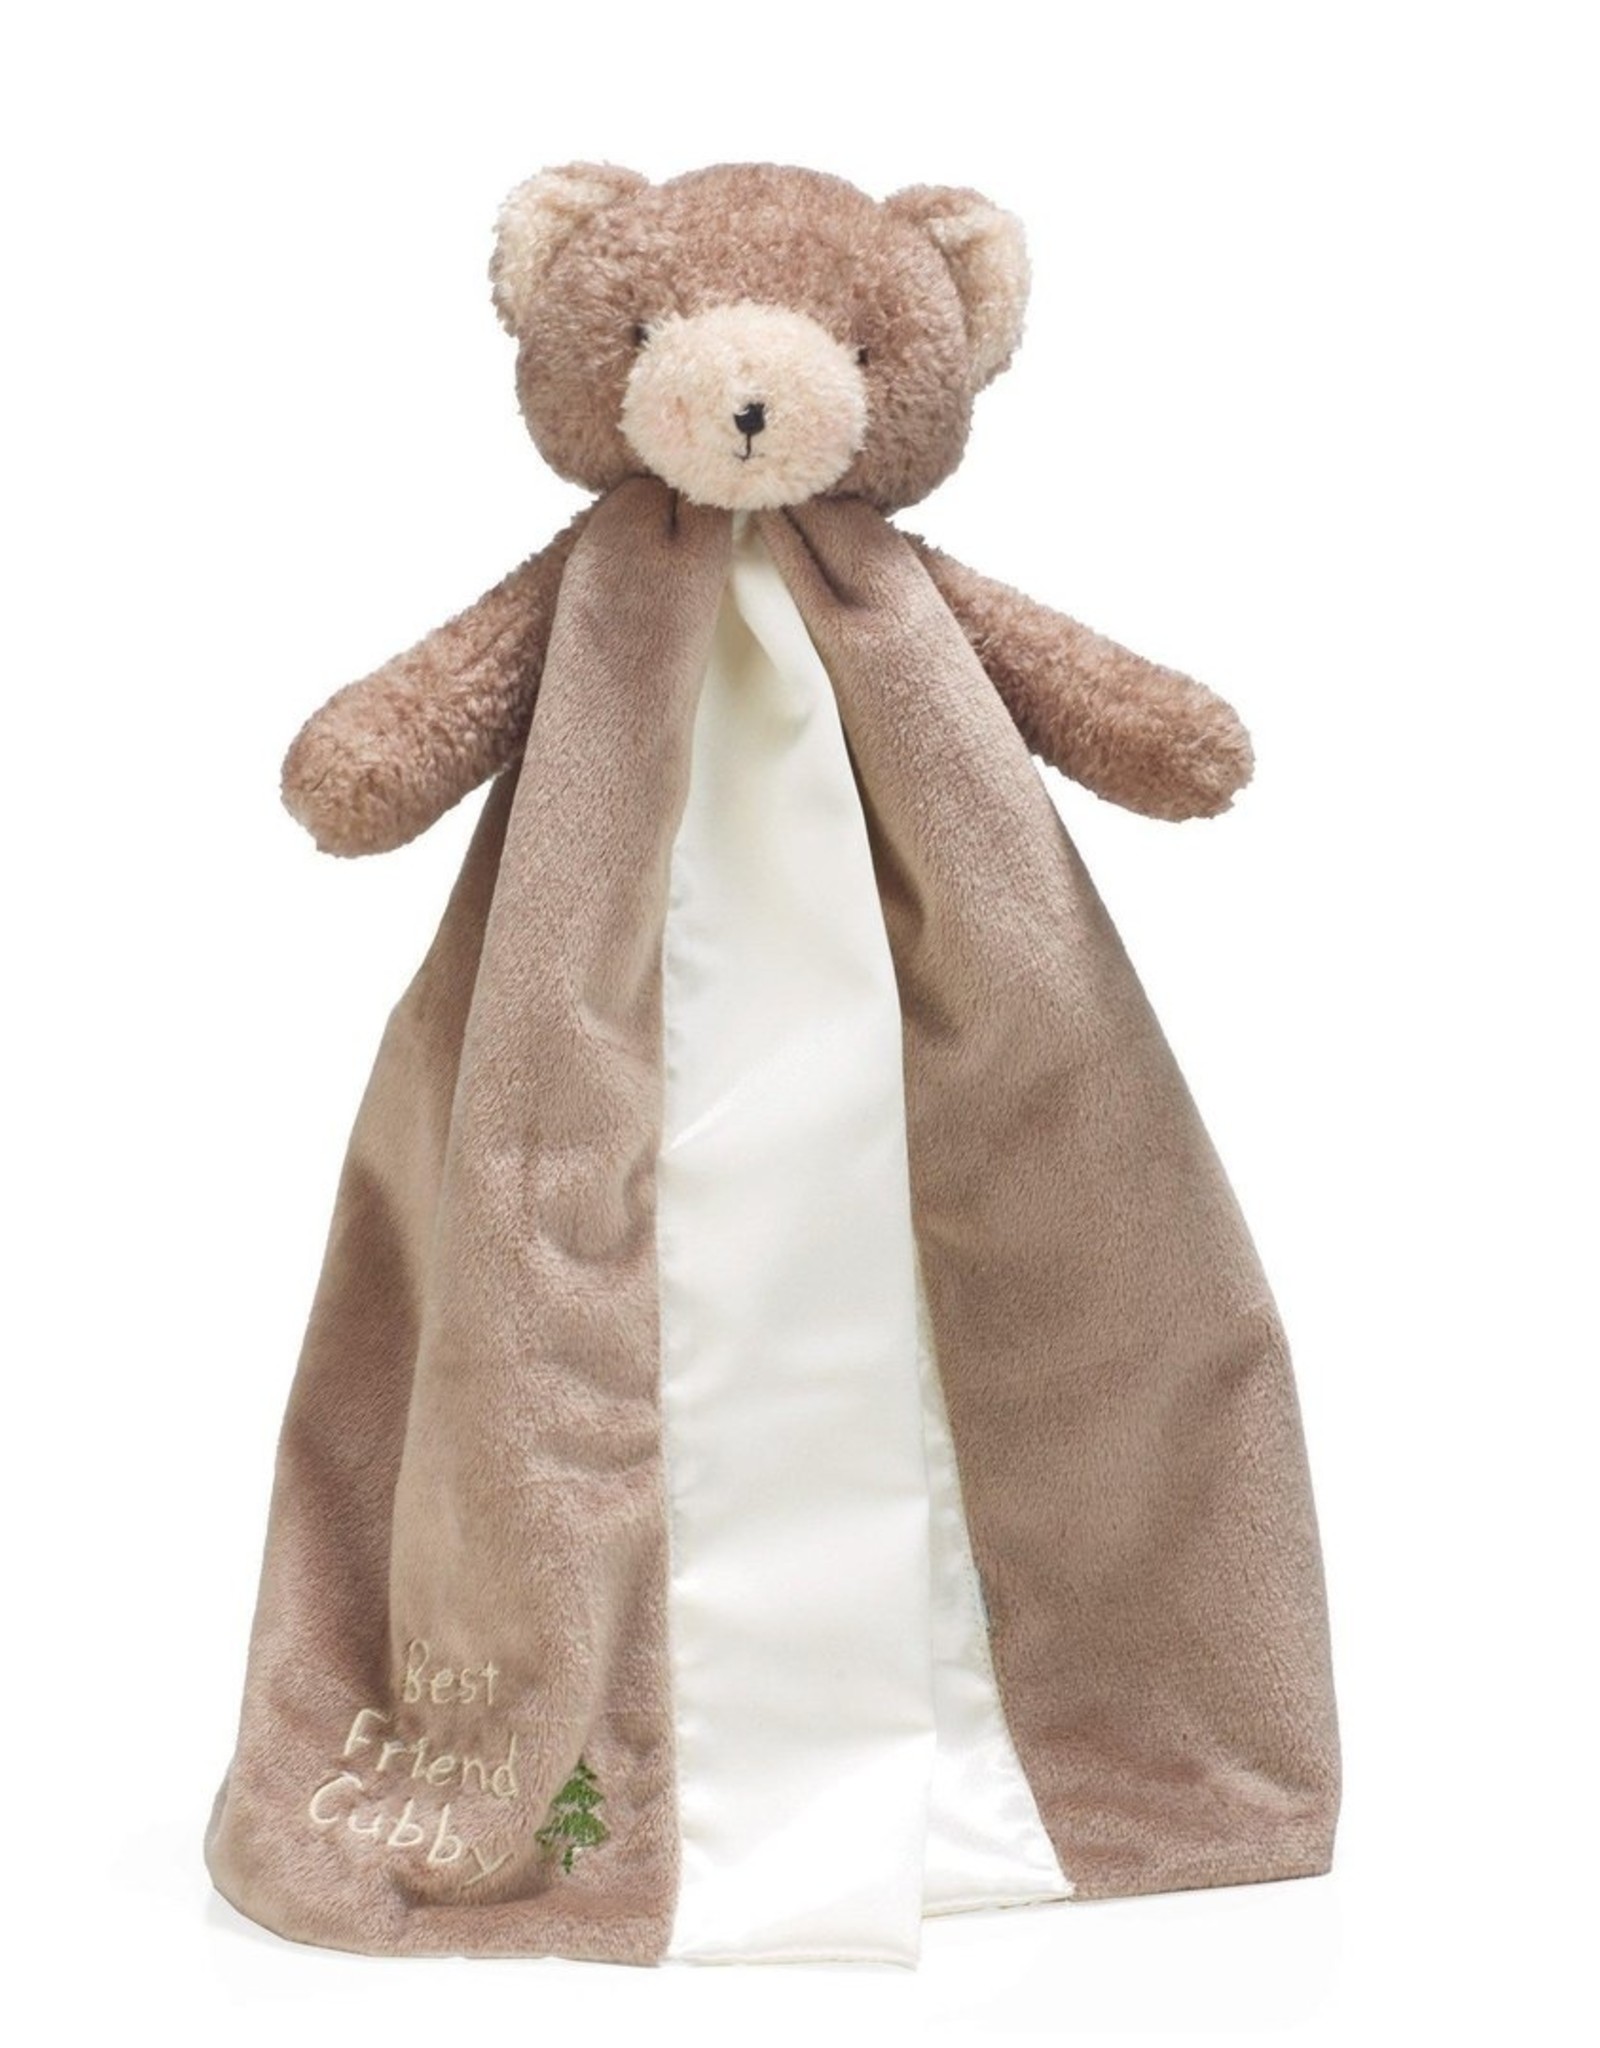 Bunnies By The Bay 100700 Cubby Buddy Blanket